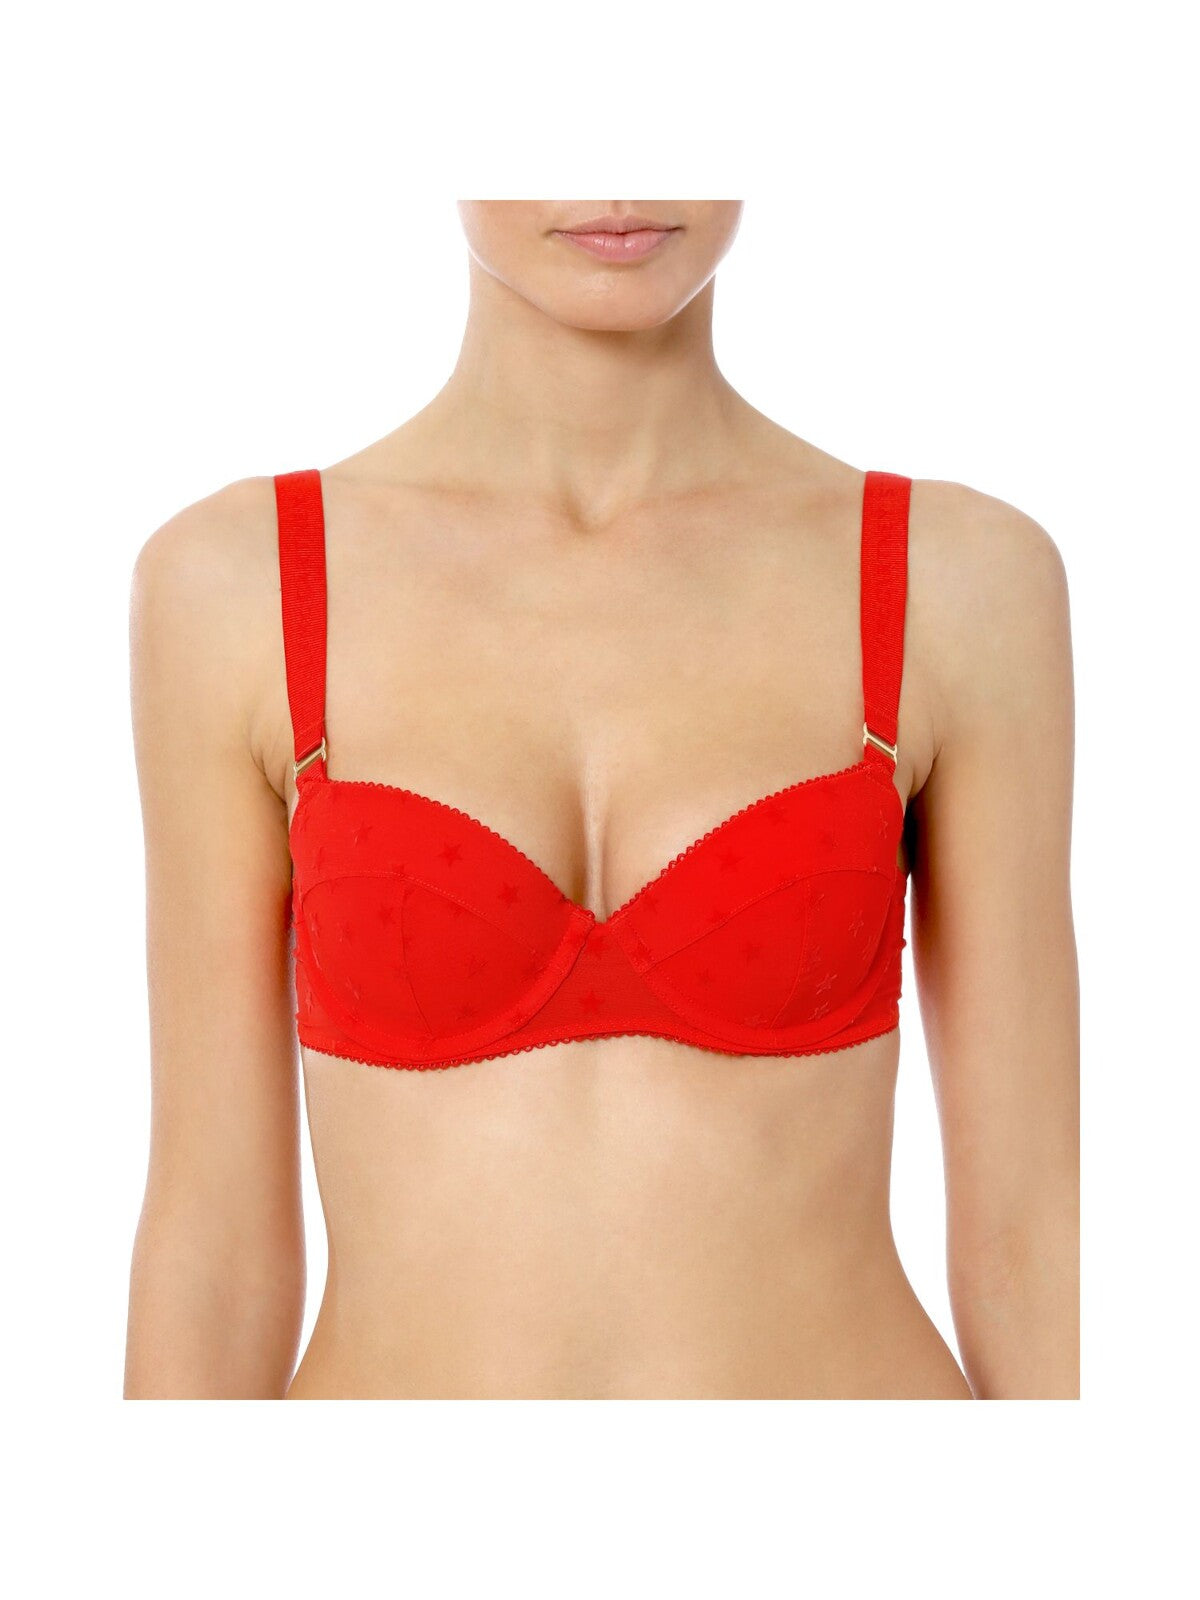 STELLAMCCARTNEY Intimates Red Logo Elastic Adjustable Straps Molded Seamed Cups Underwire Bra 36 A